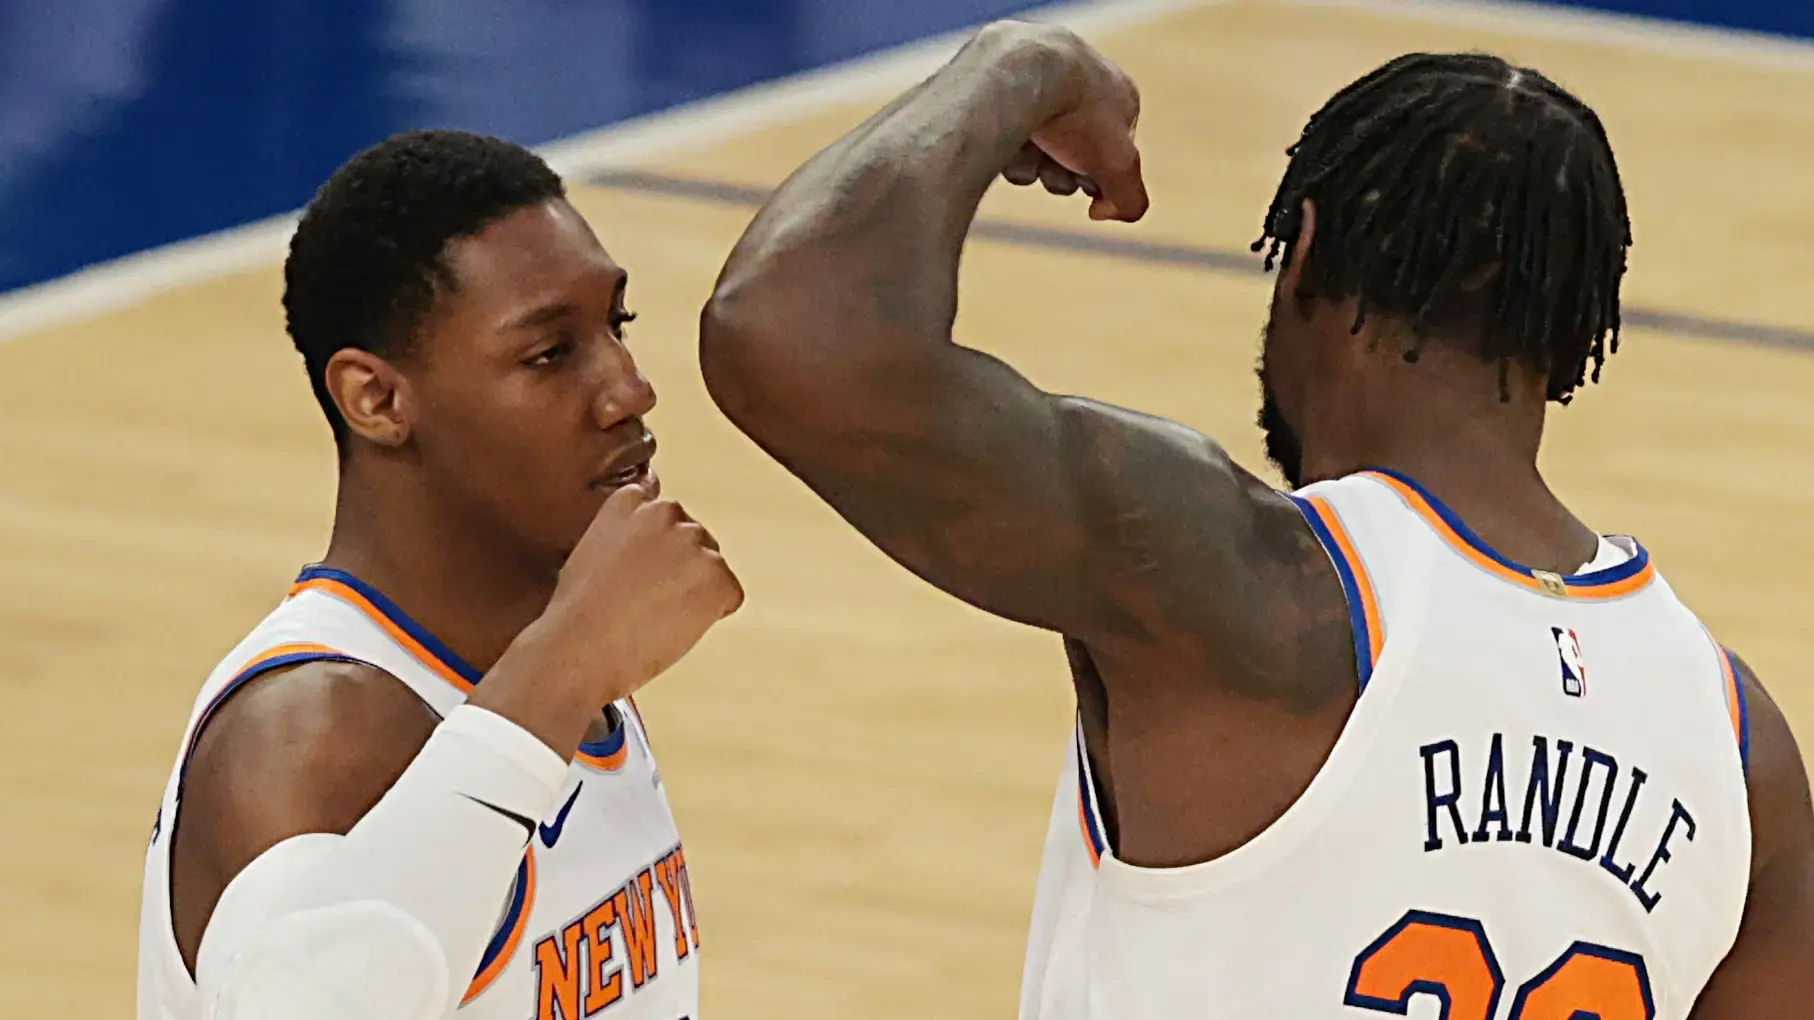 May 16, 2021; New York, New York, USA; New York Knicks forward Julius Randle (30) celebrates with guard RJ Barrett (9) during the first half against the Boston Celtics at Madison Square Garden. Mandatory Credit: Vincent Carchietta-USA TODAY Sports / © Vincent Carchietta-USA TODAY Sports